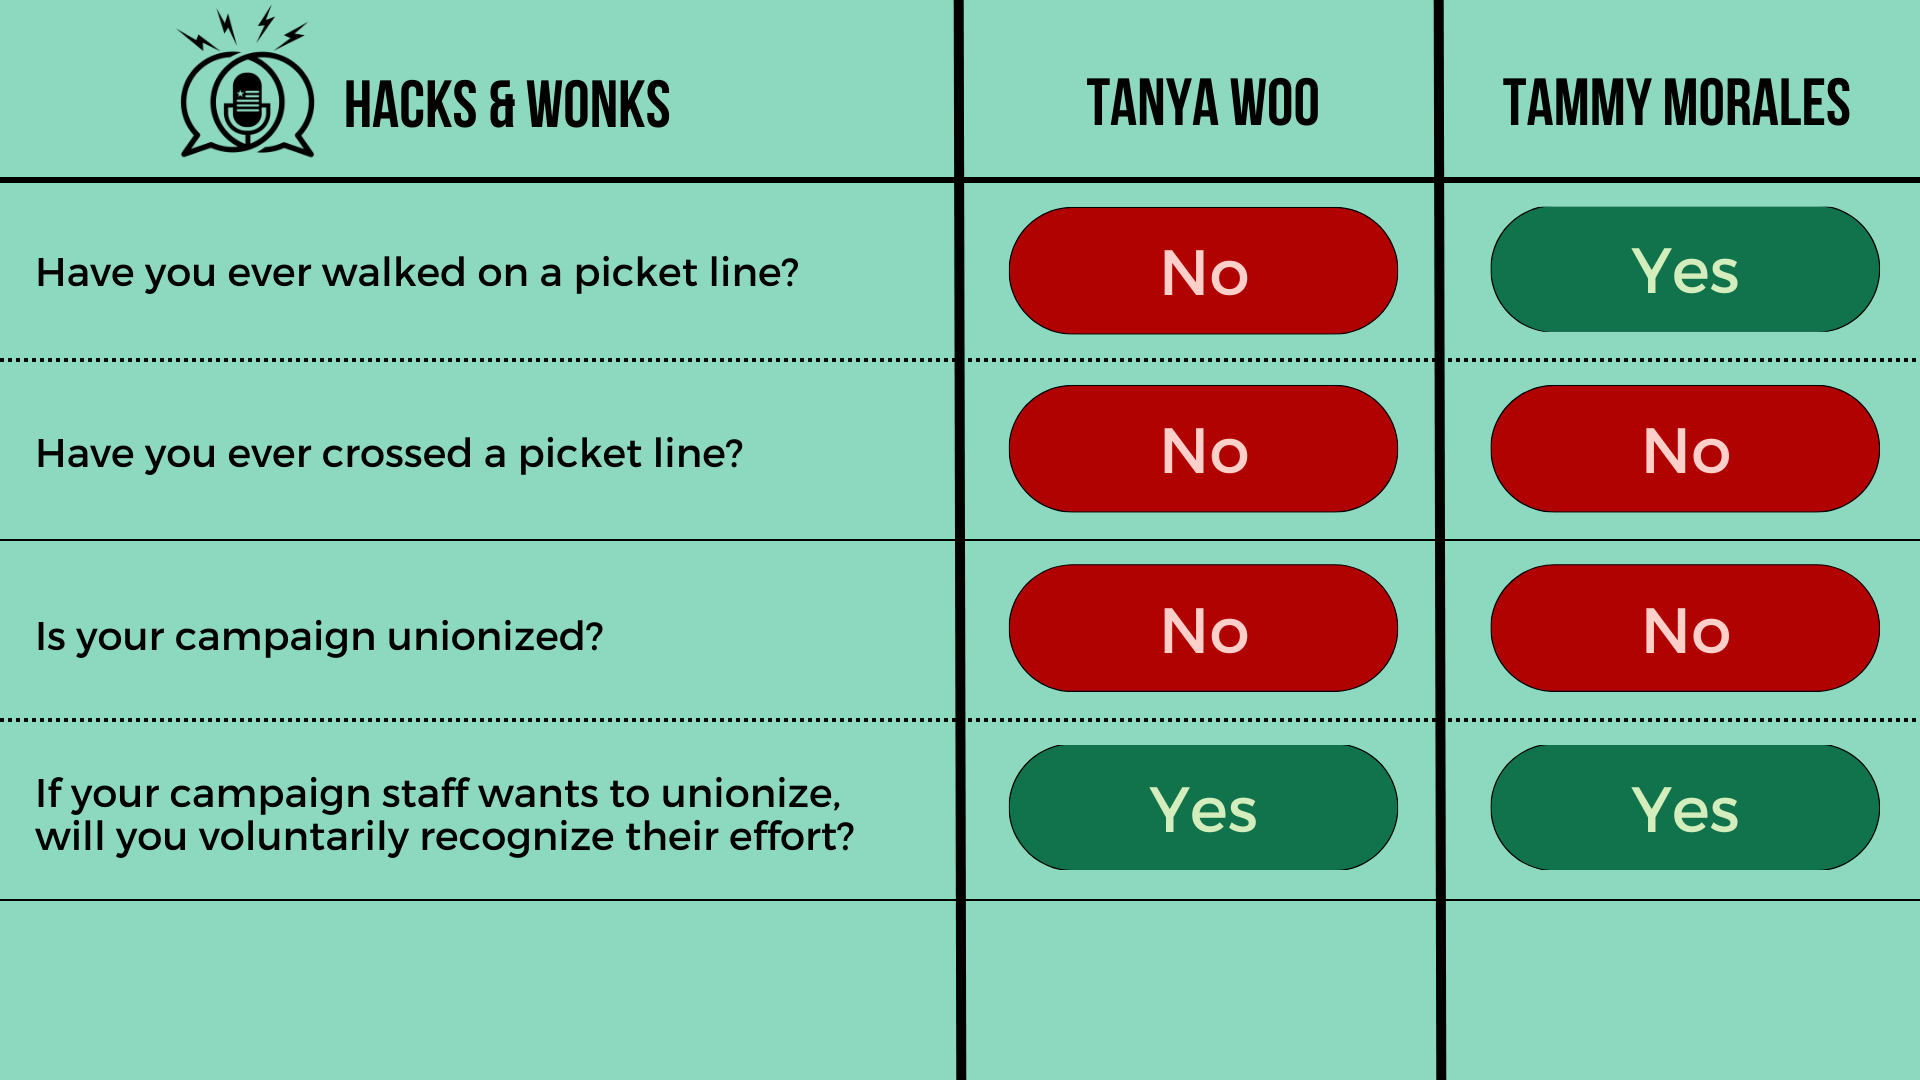 Q: Have you ever walked on a picket line? Tanya Woo: No, Tammy Morales: Yes  Q: Have you ever crossed a picket line? Tanya Woo: No, Tammy Morales: No  Q: Is your campaign unionized? Tanya Woo: No, Tammy Morales: No  Q: If your campaign staff wants to